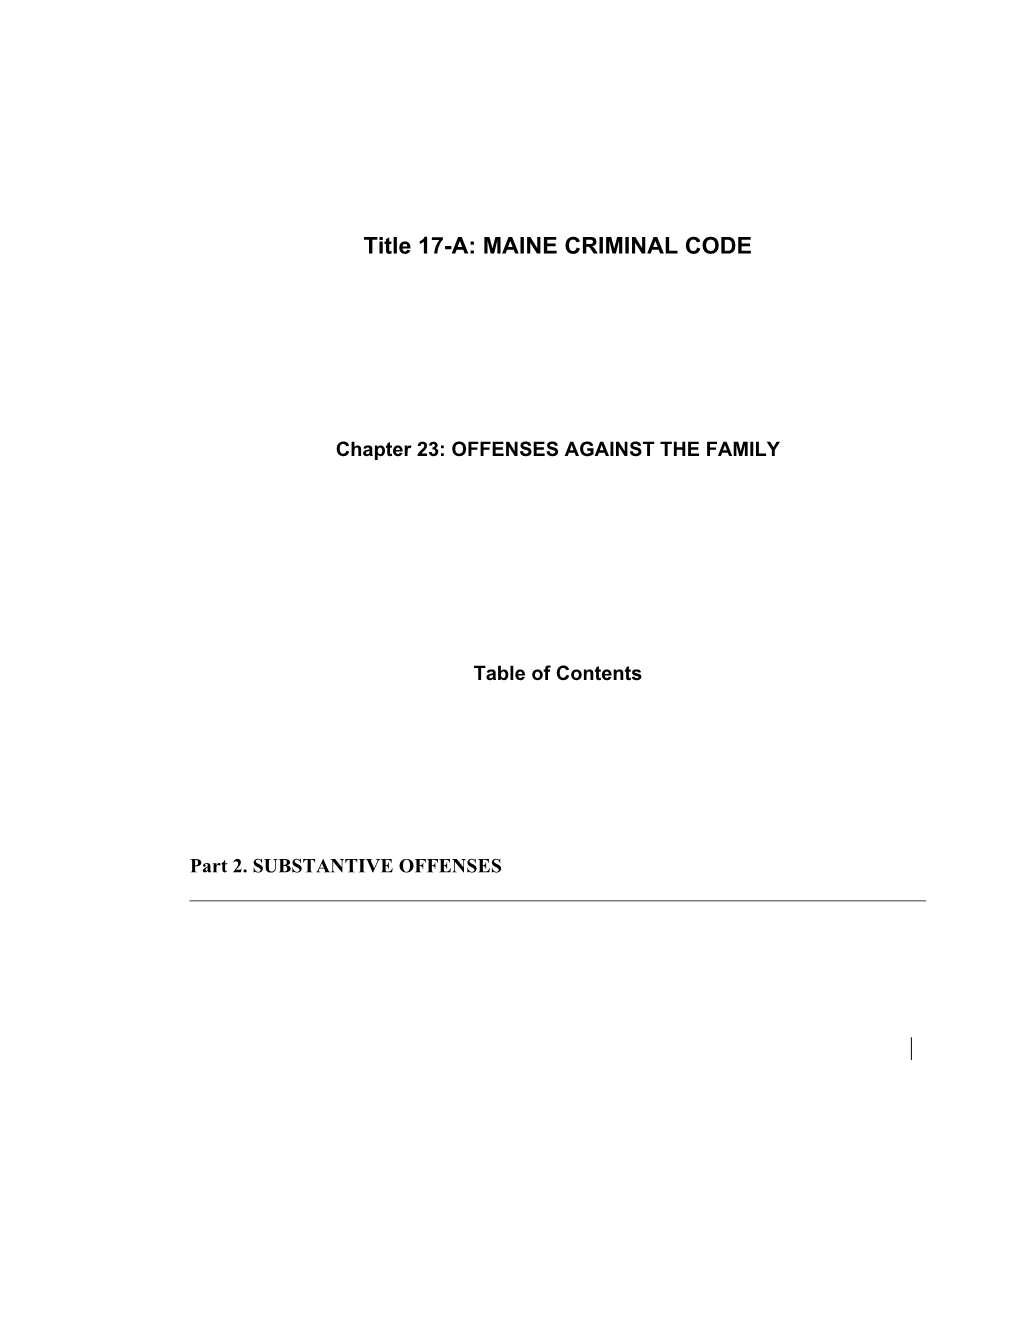 MRS Title 17-A, Chapter23: OFFENSES AGAINST the FAMILY